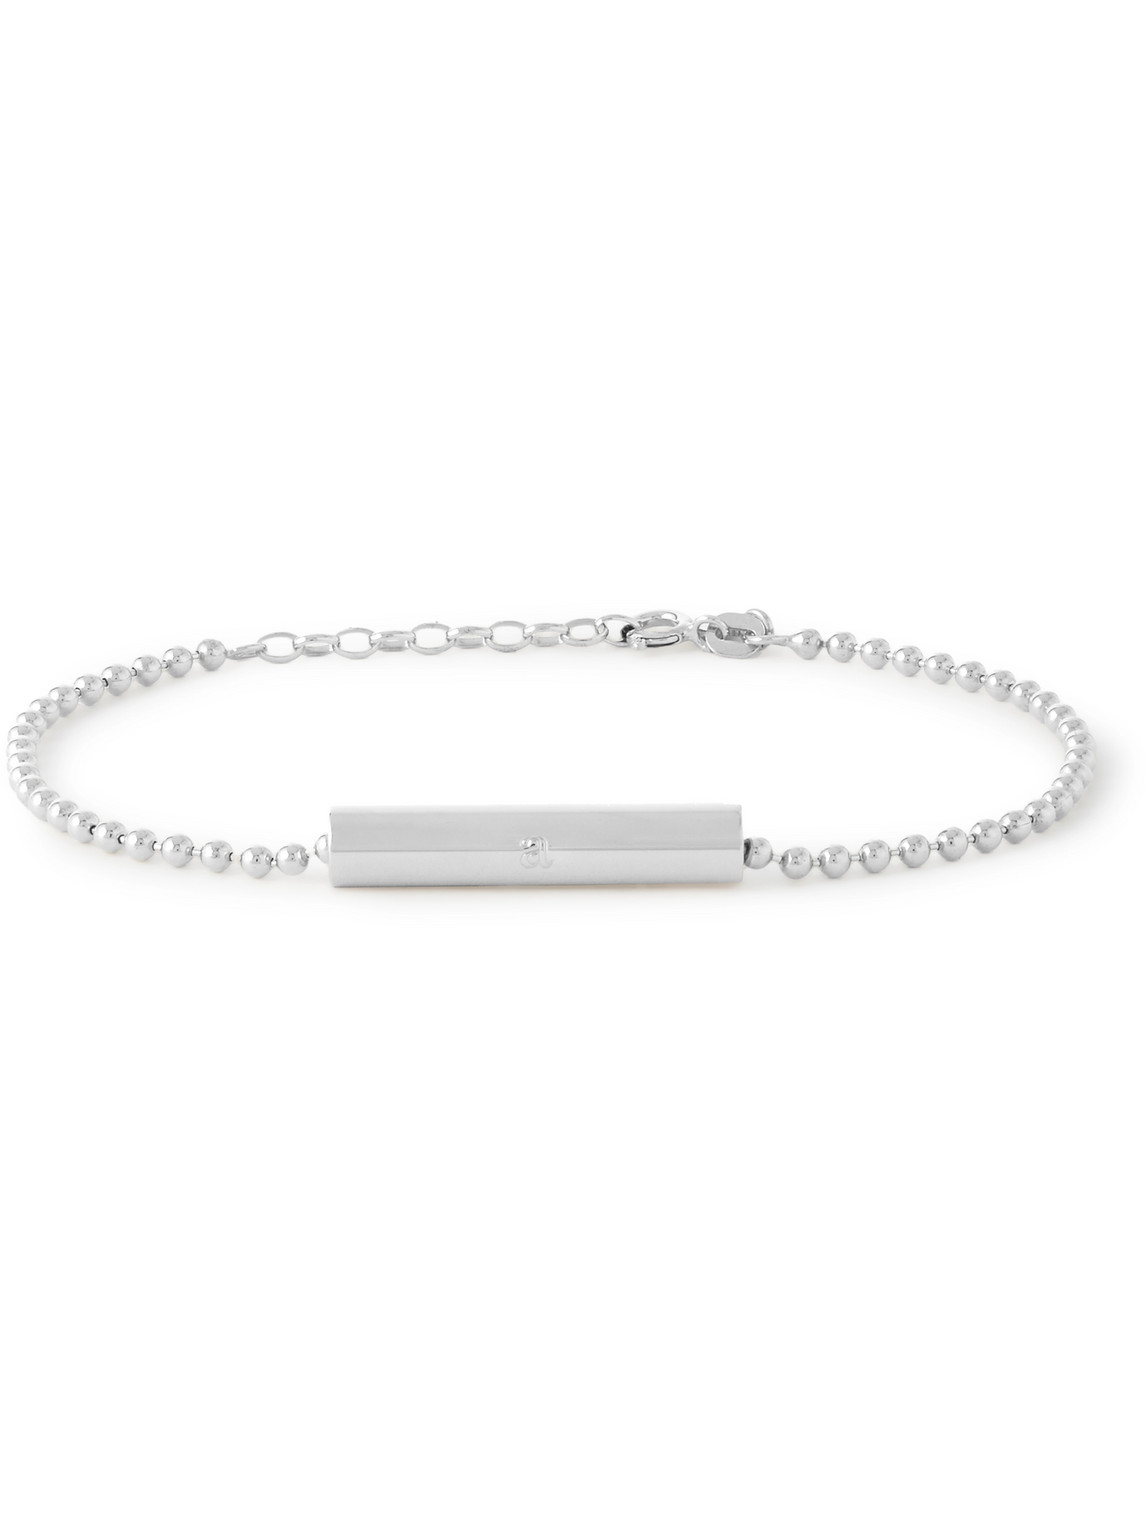 Alice Made This Charlie Sterling Silver Id Bracelet